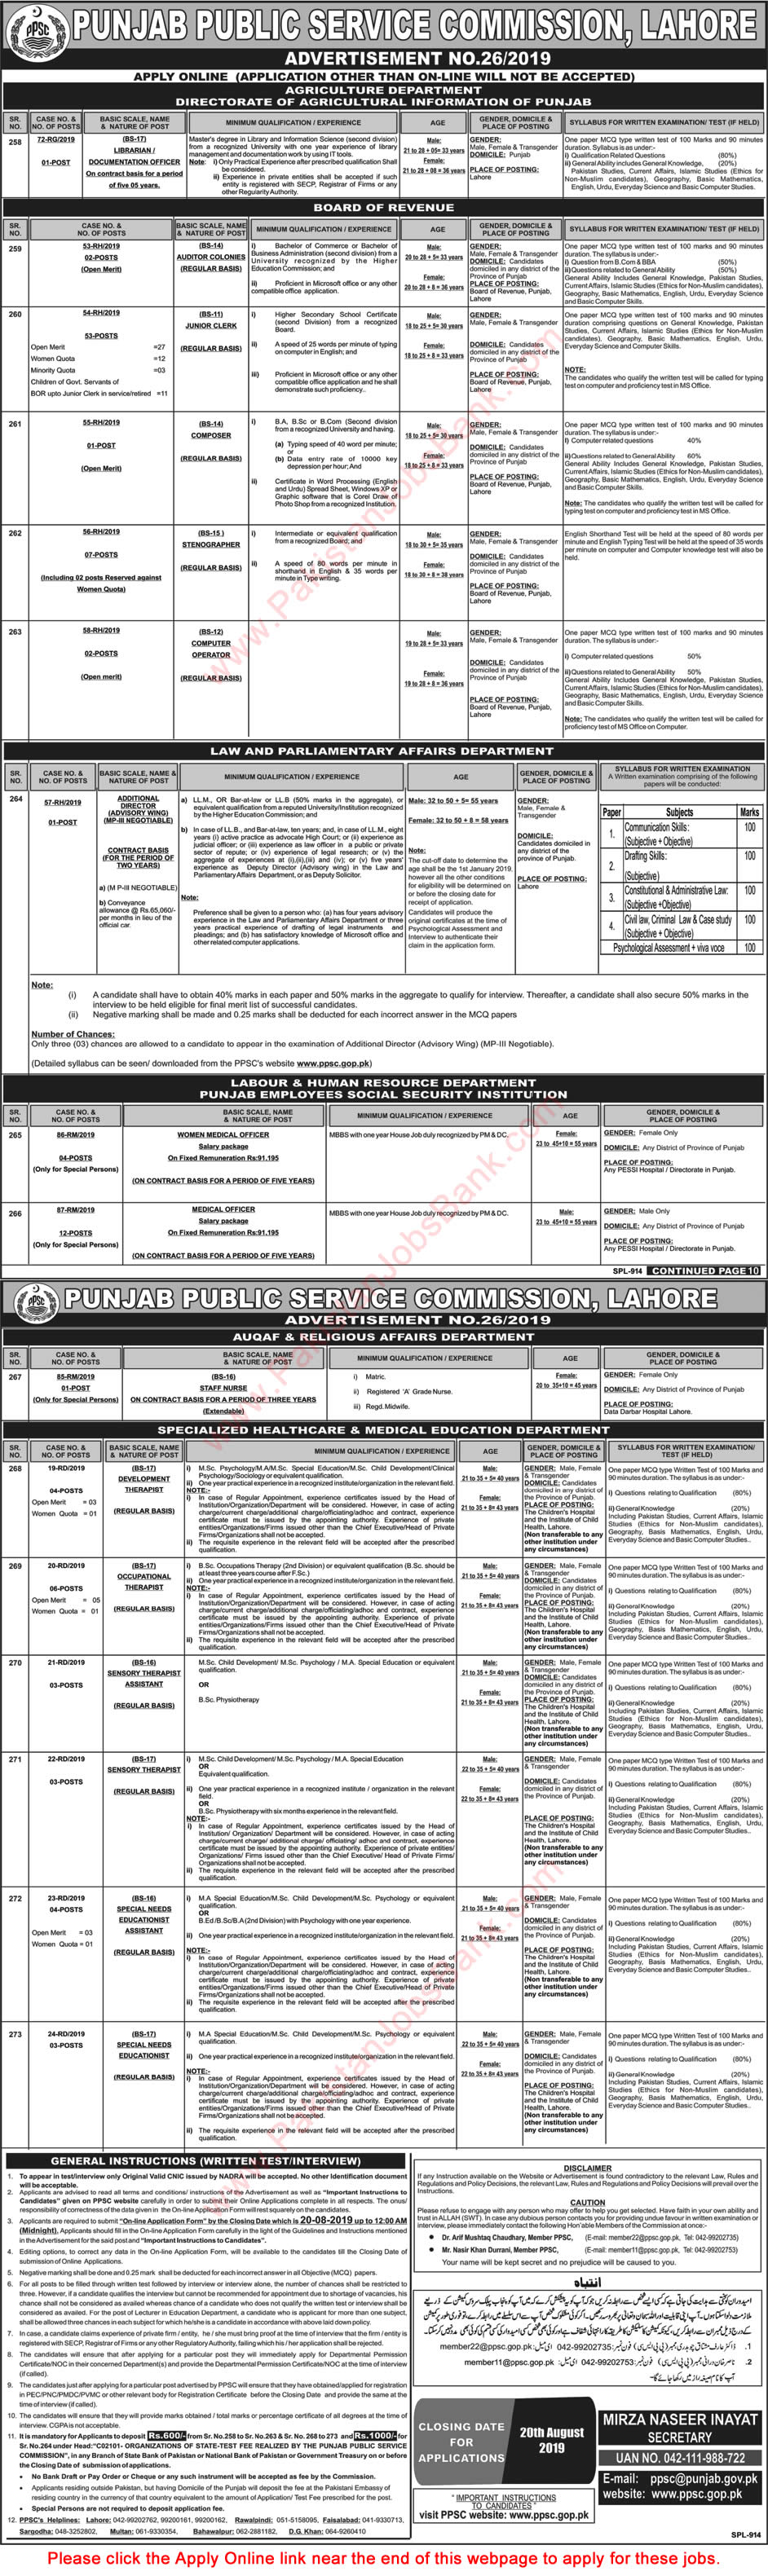 PPSC Jobs August 2019 Apply Online Consolidated Advertisement No 26/2019 Latest